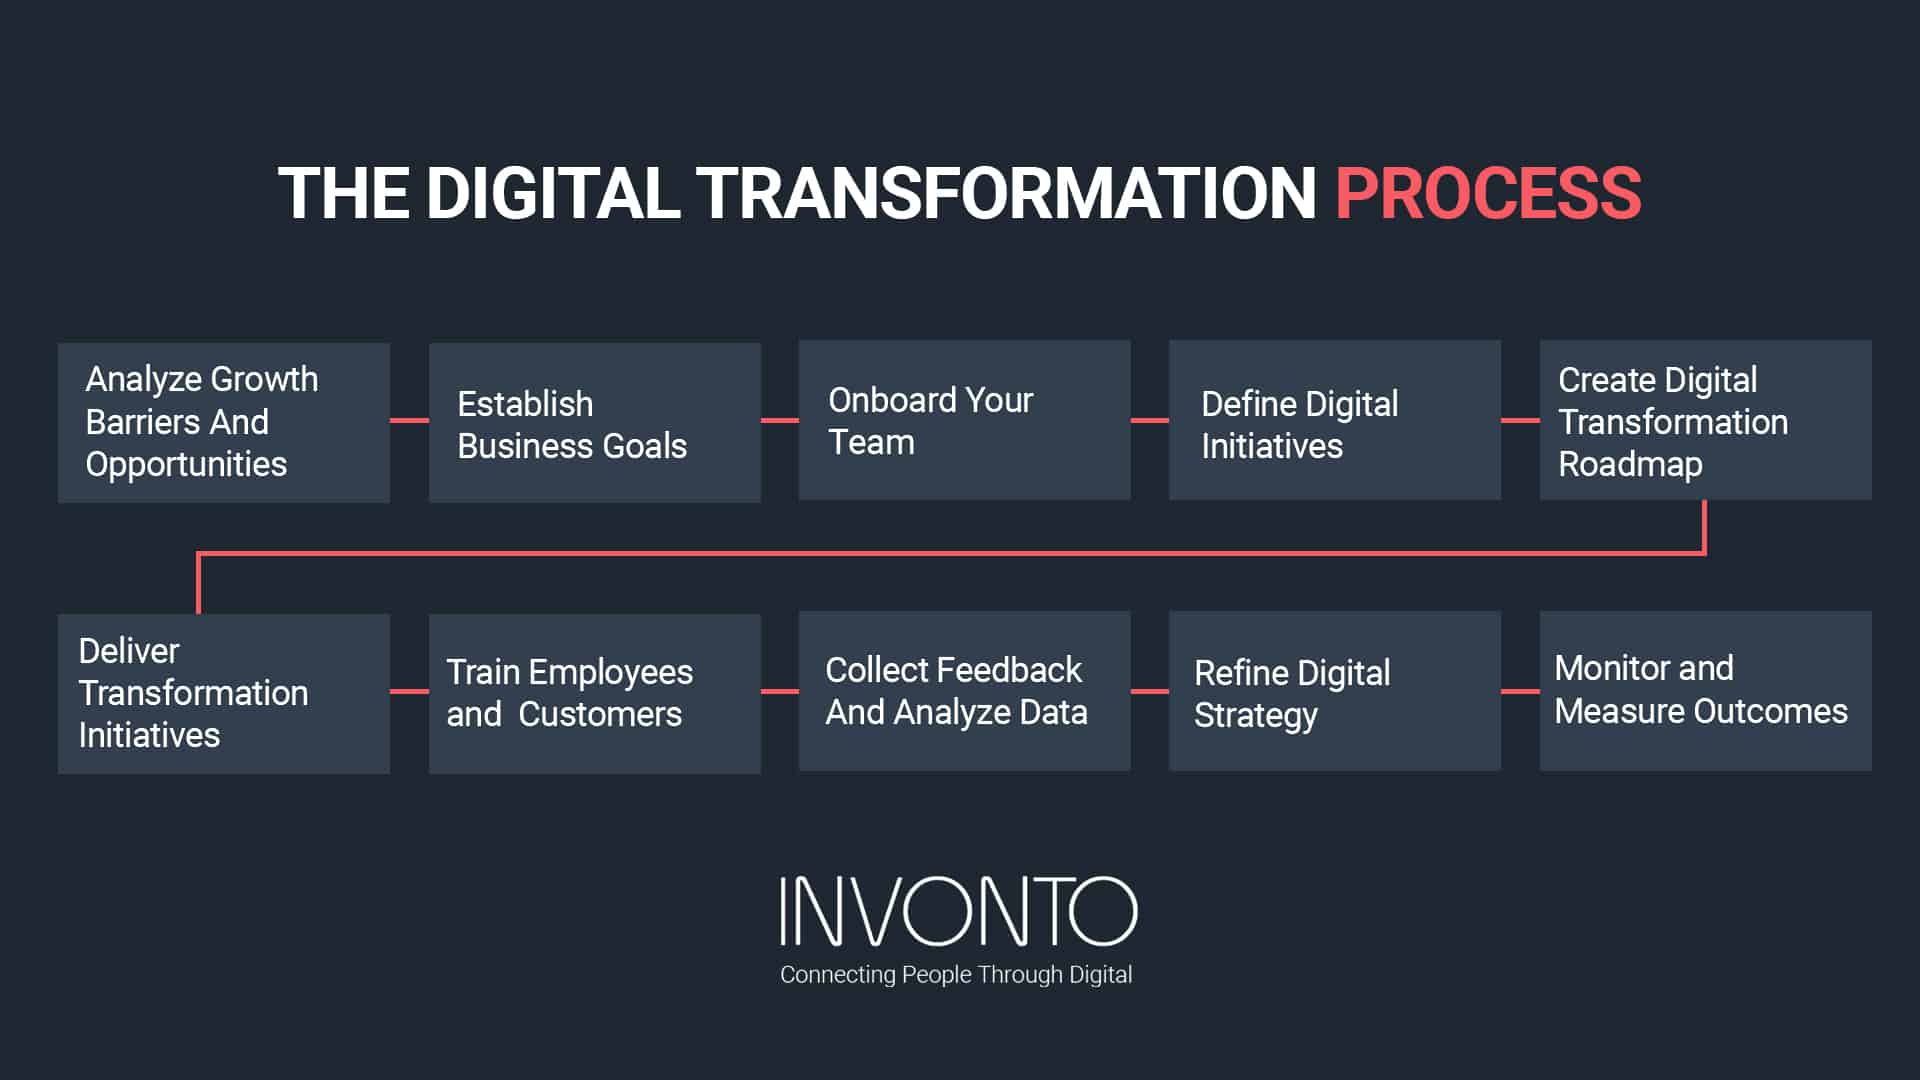 The digital transformation process by Invonto